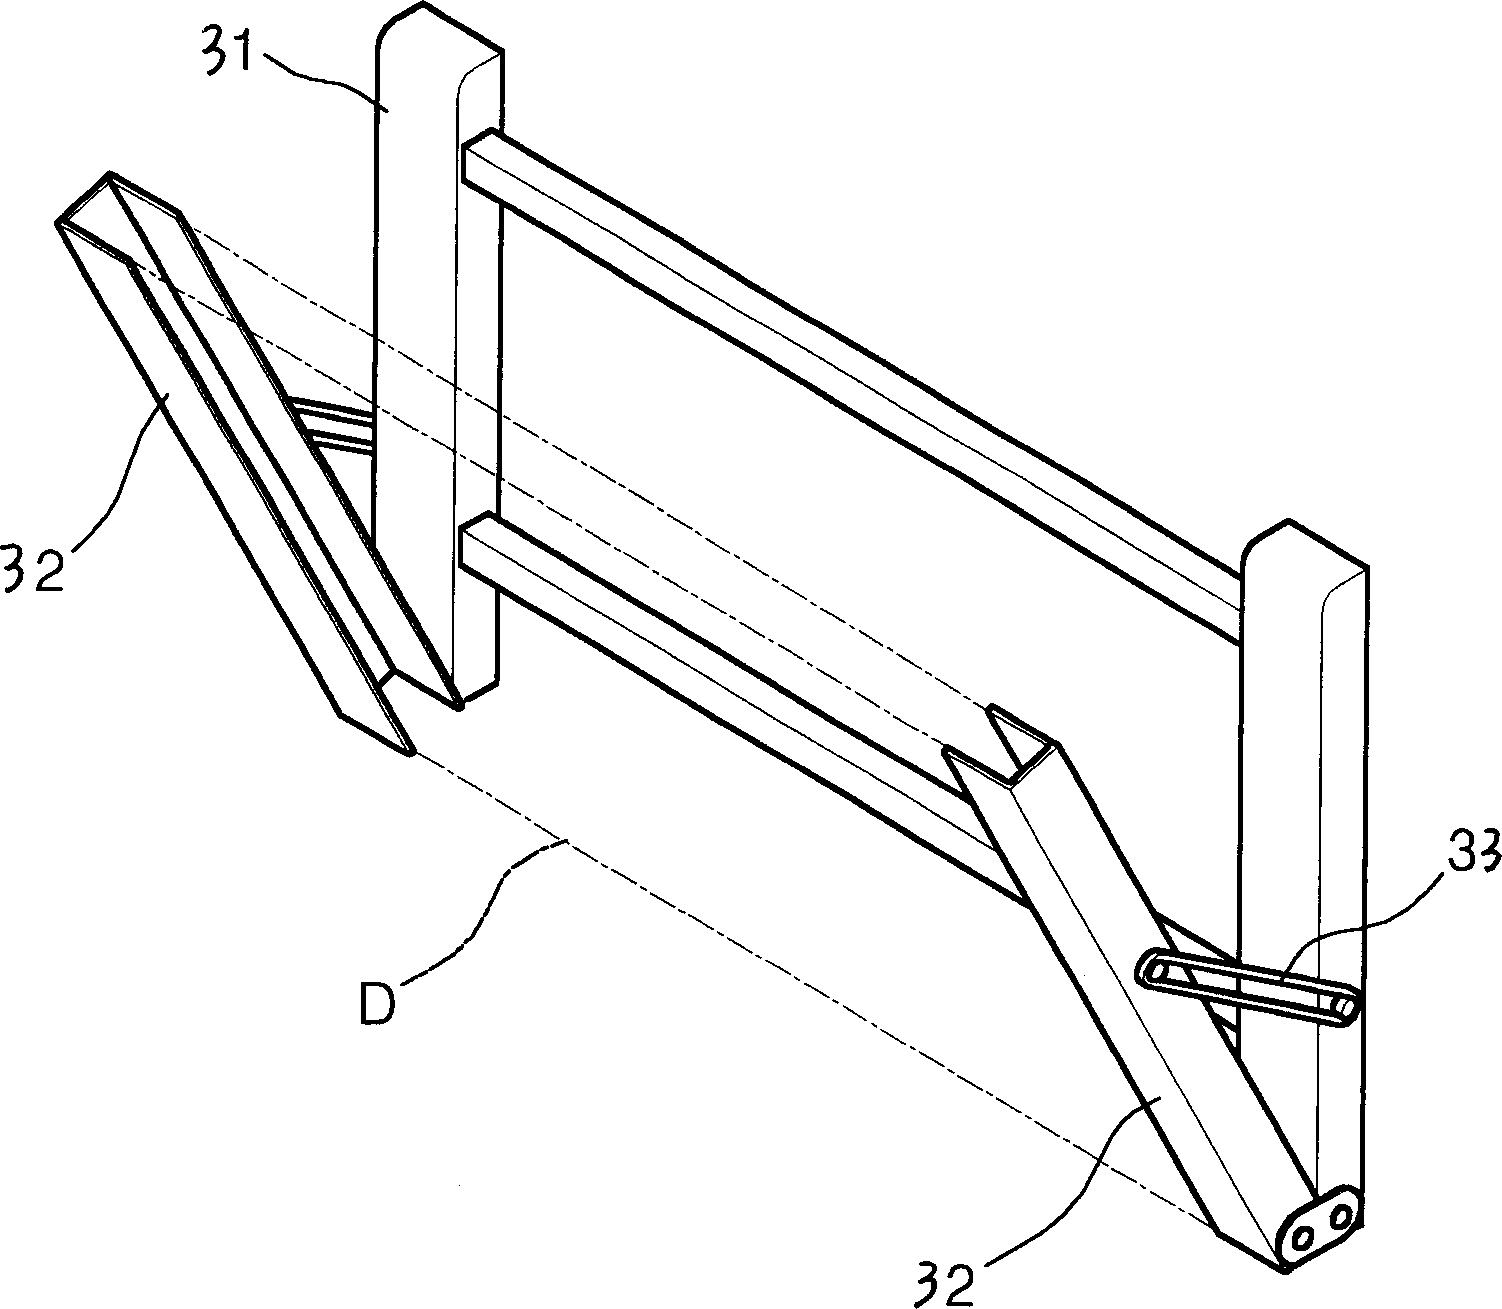 Apparatus for regulating display device angle, and its connection support